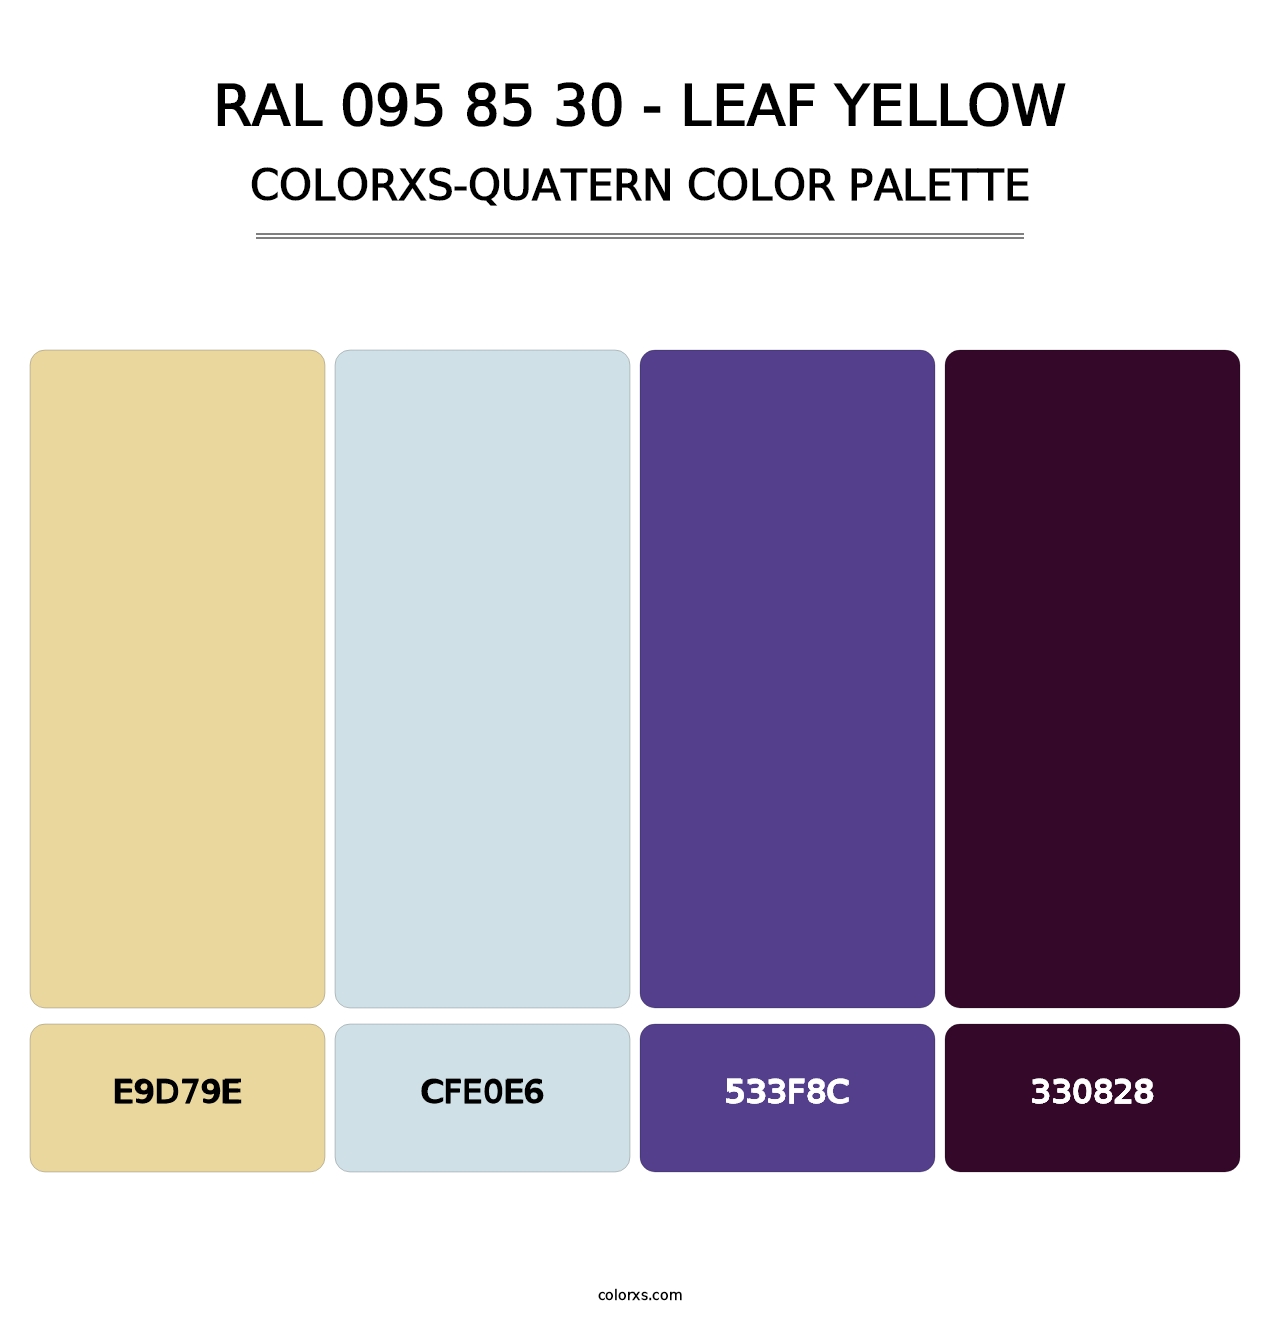 RAL 095 85 30 - Leaf Yellow - Colorxs Quatern Palette